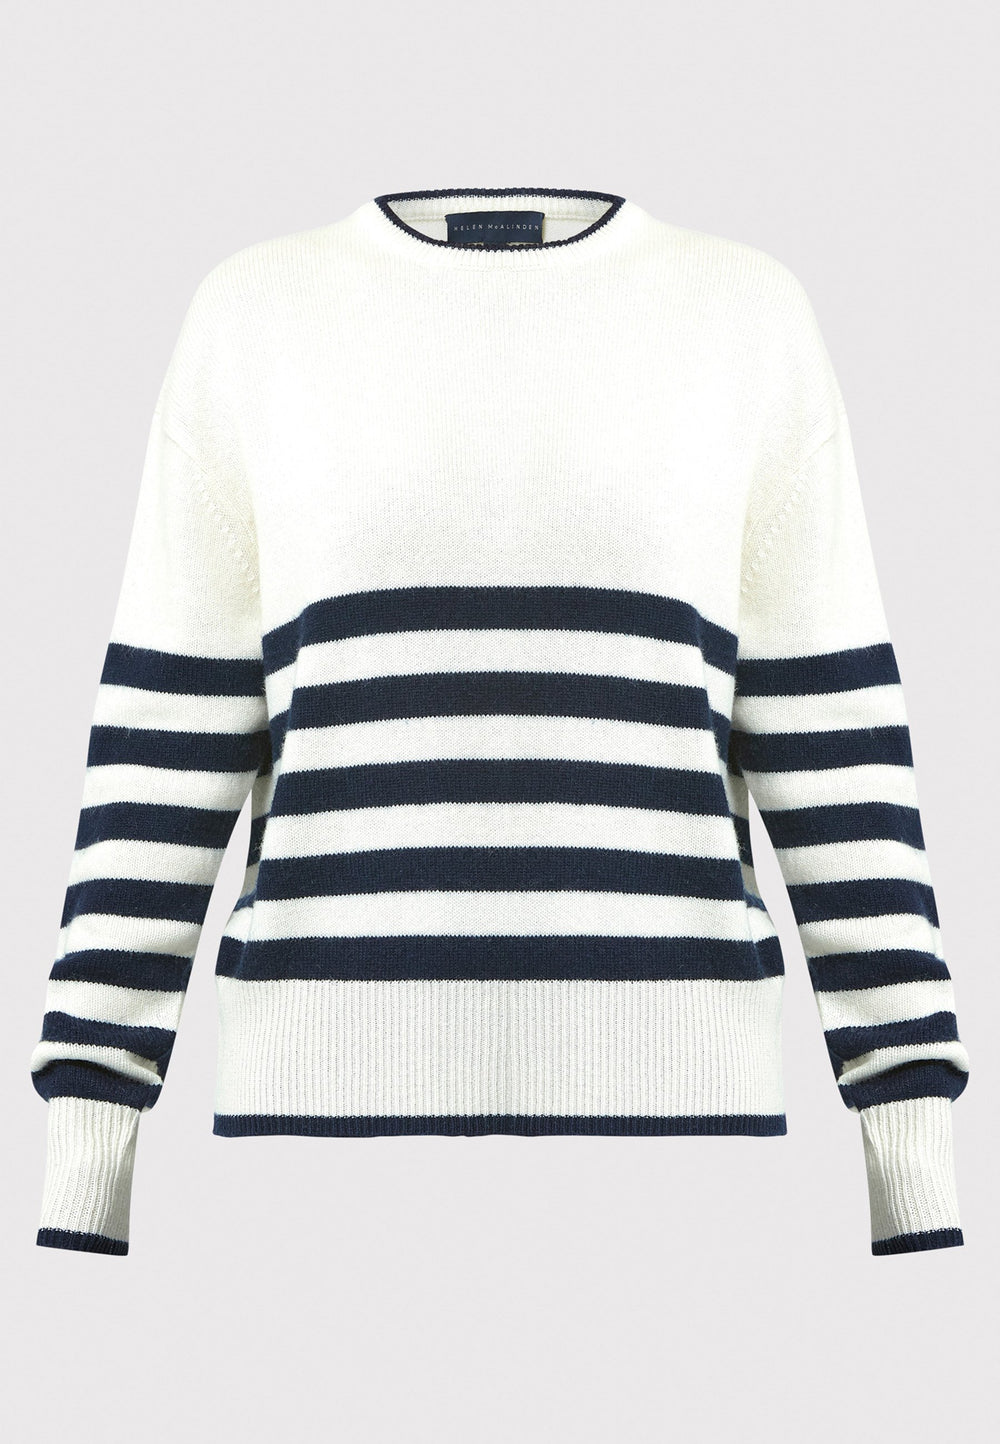 The Marine Stripe Sweater is a luxurious blend of extra fine merino wool and cashmere, ensuring a soft and warm experience.